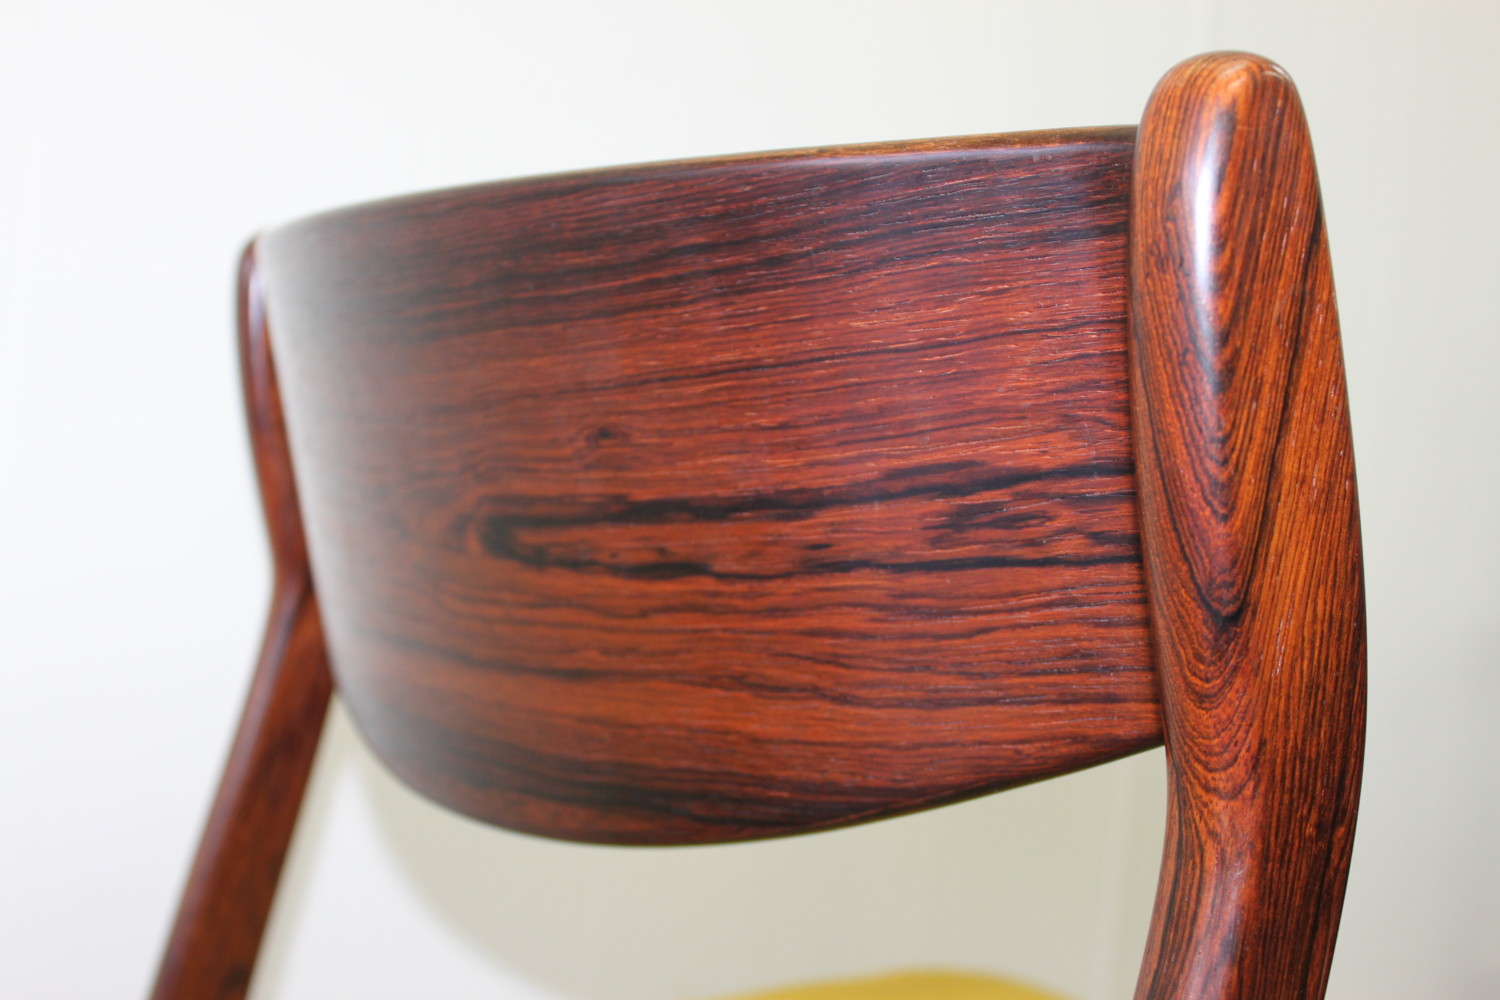 Danish Rosewood Dining Chairs x6